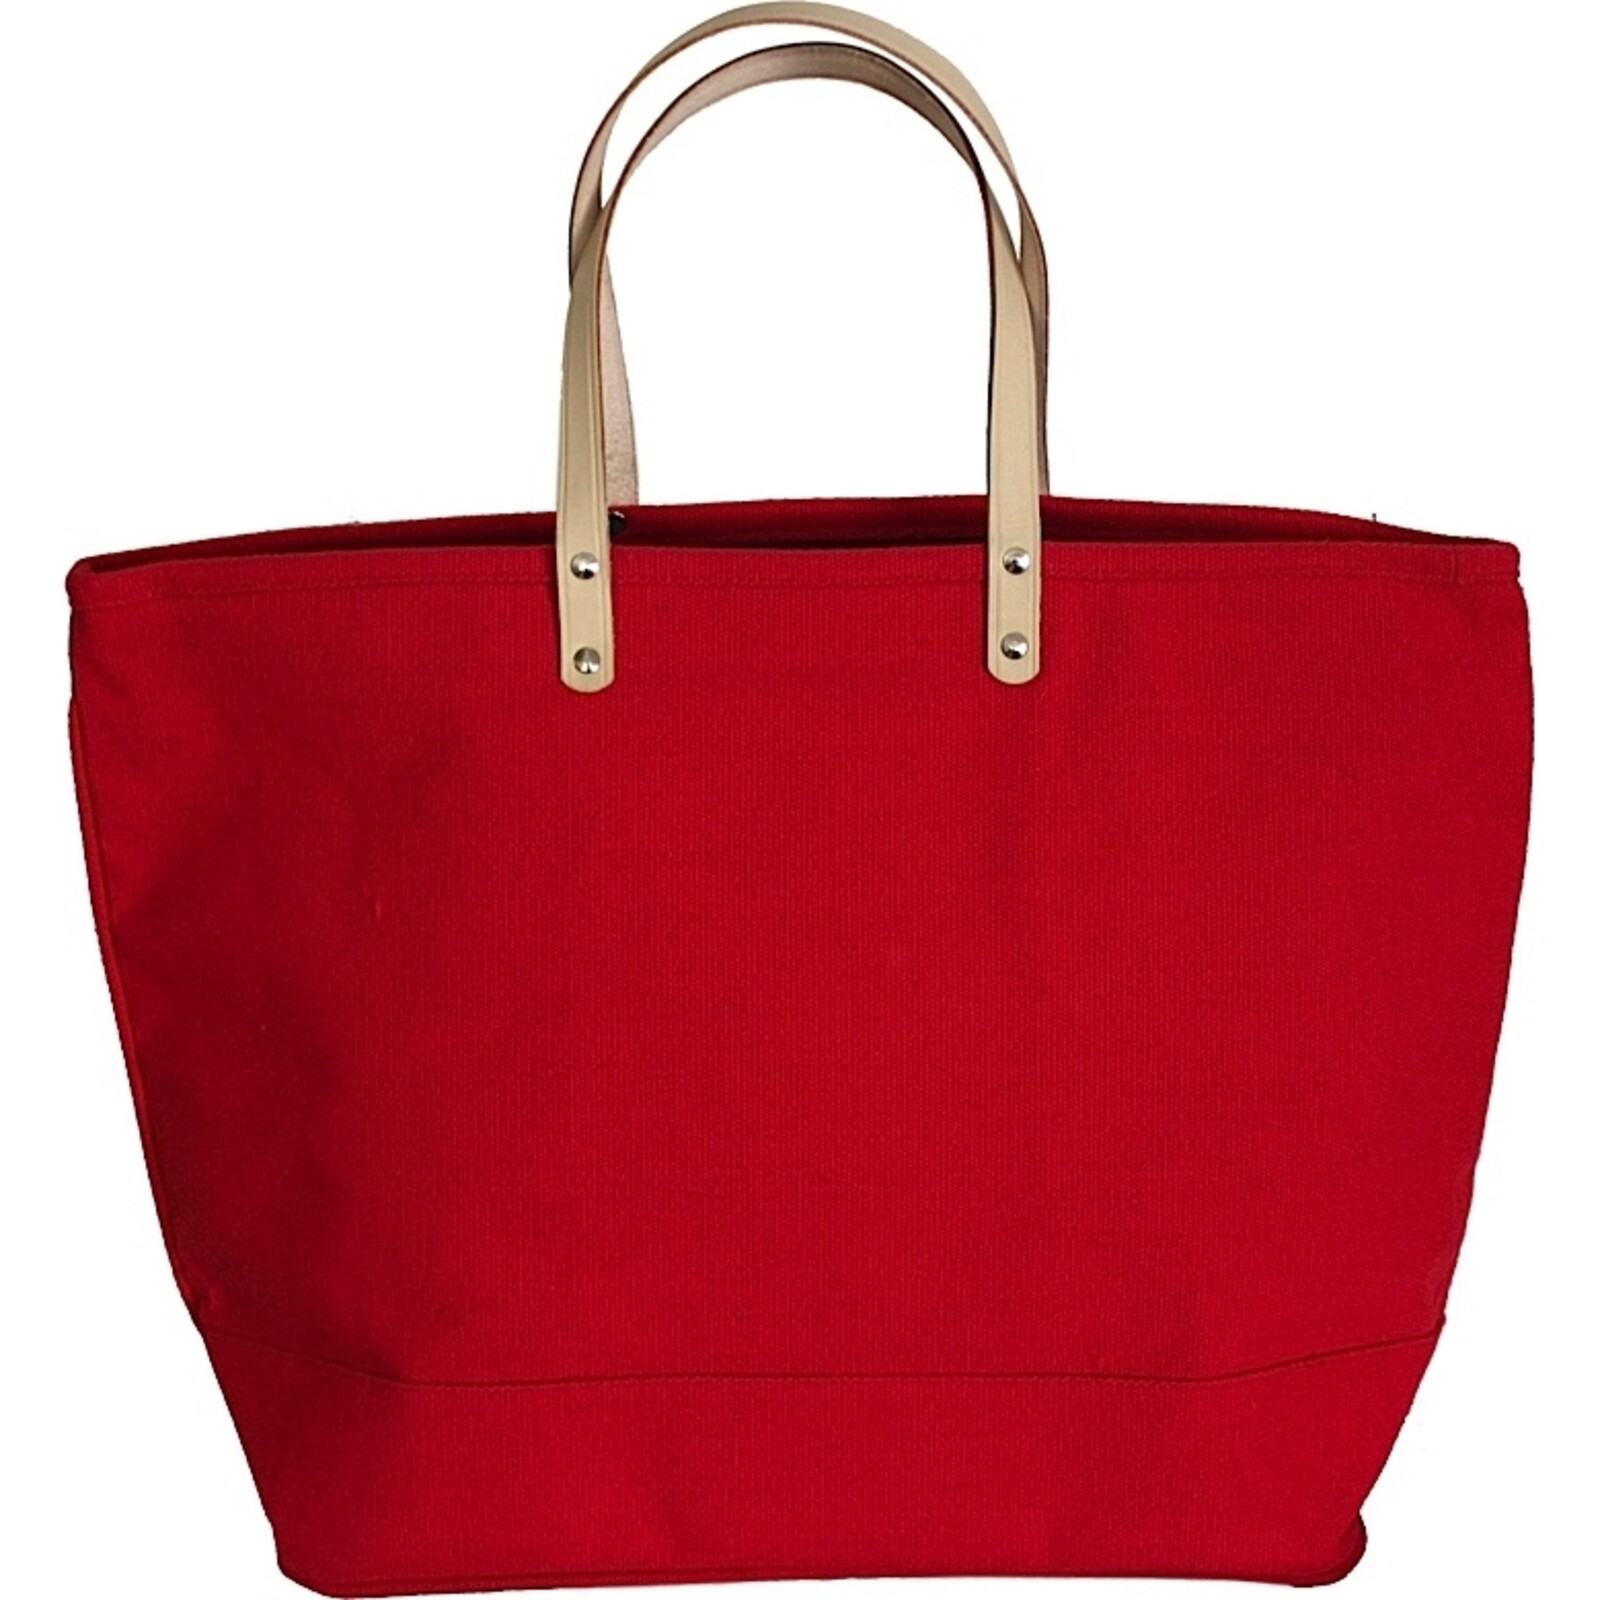 Red Beach Bag with Leather Handles